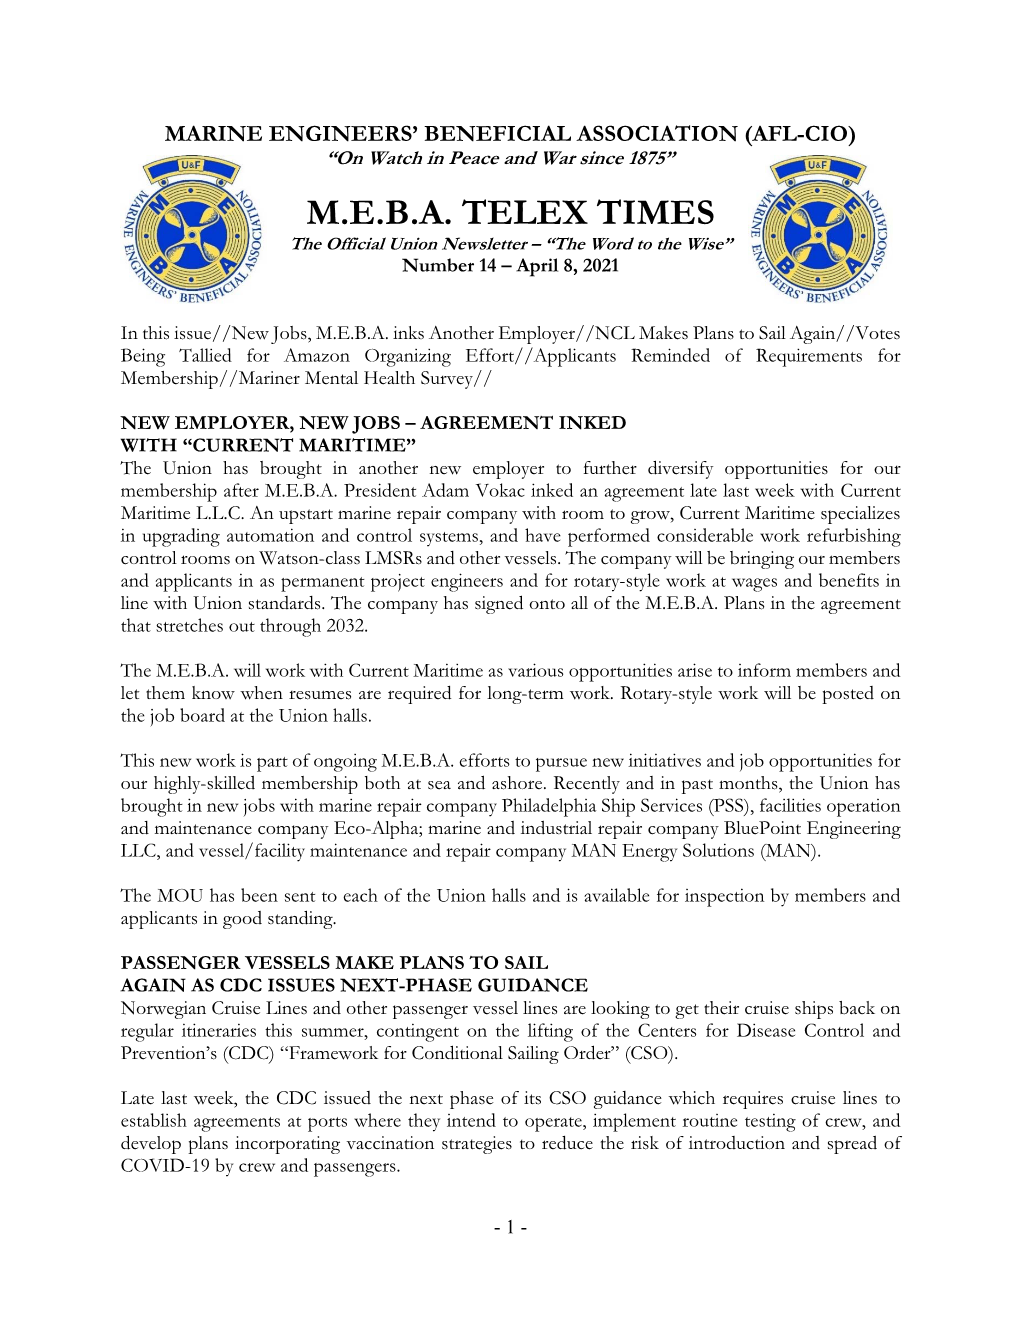 M.E.B.A. TELEX TIMES the Official Union Newsletter – “The Word to the Wise” Number 14 – April 8, 2021